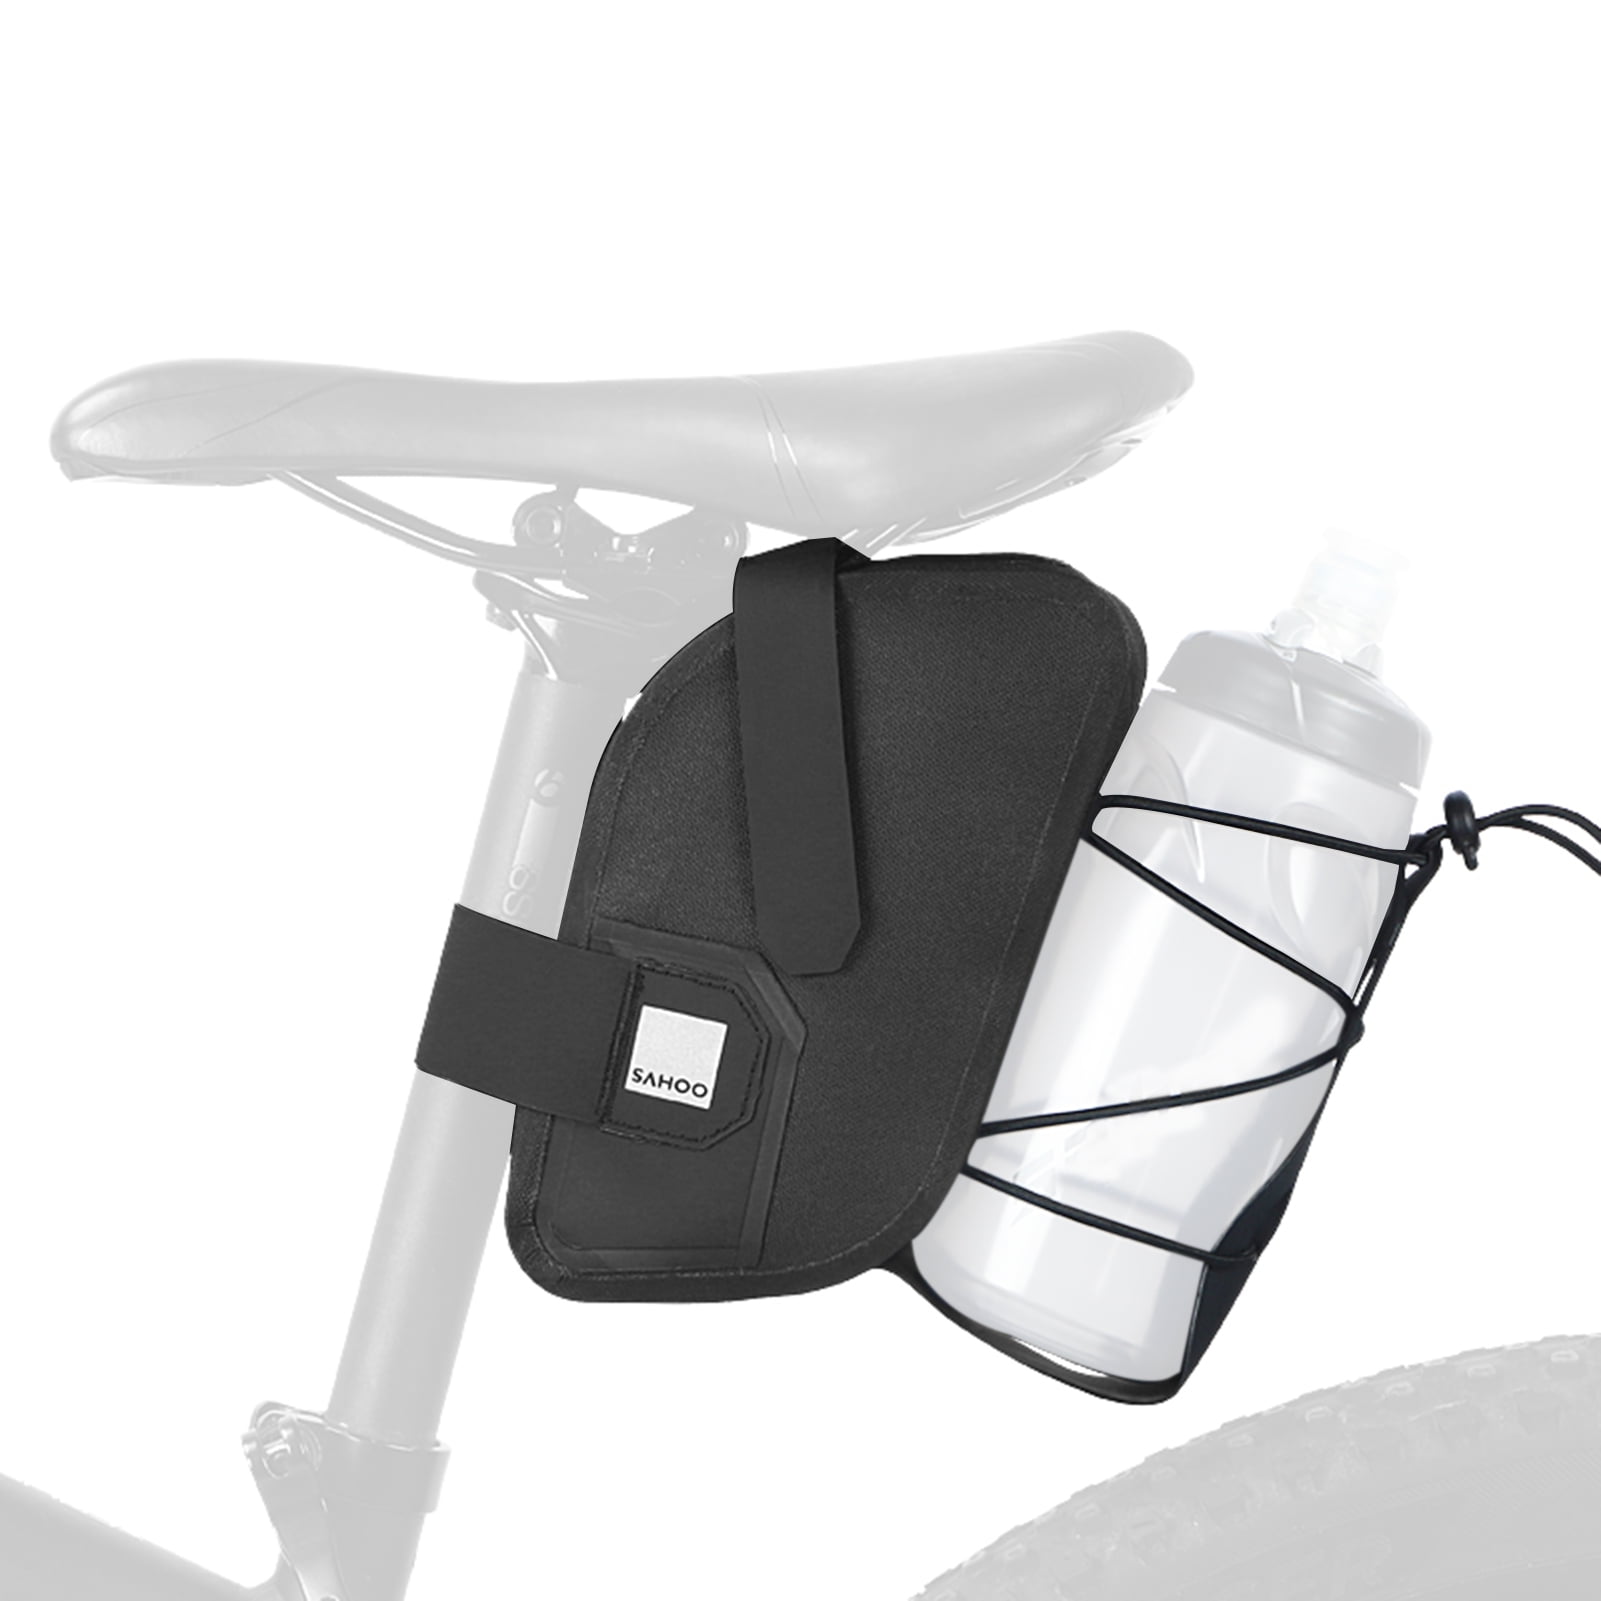 Cycling Bicycle Bags Pouch Holder Saddle Bag Tail Seat Waterproof Storage Bags